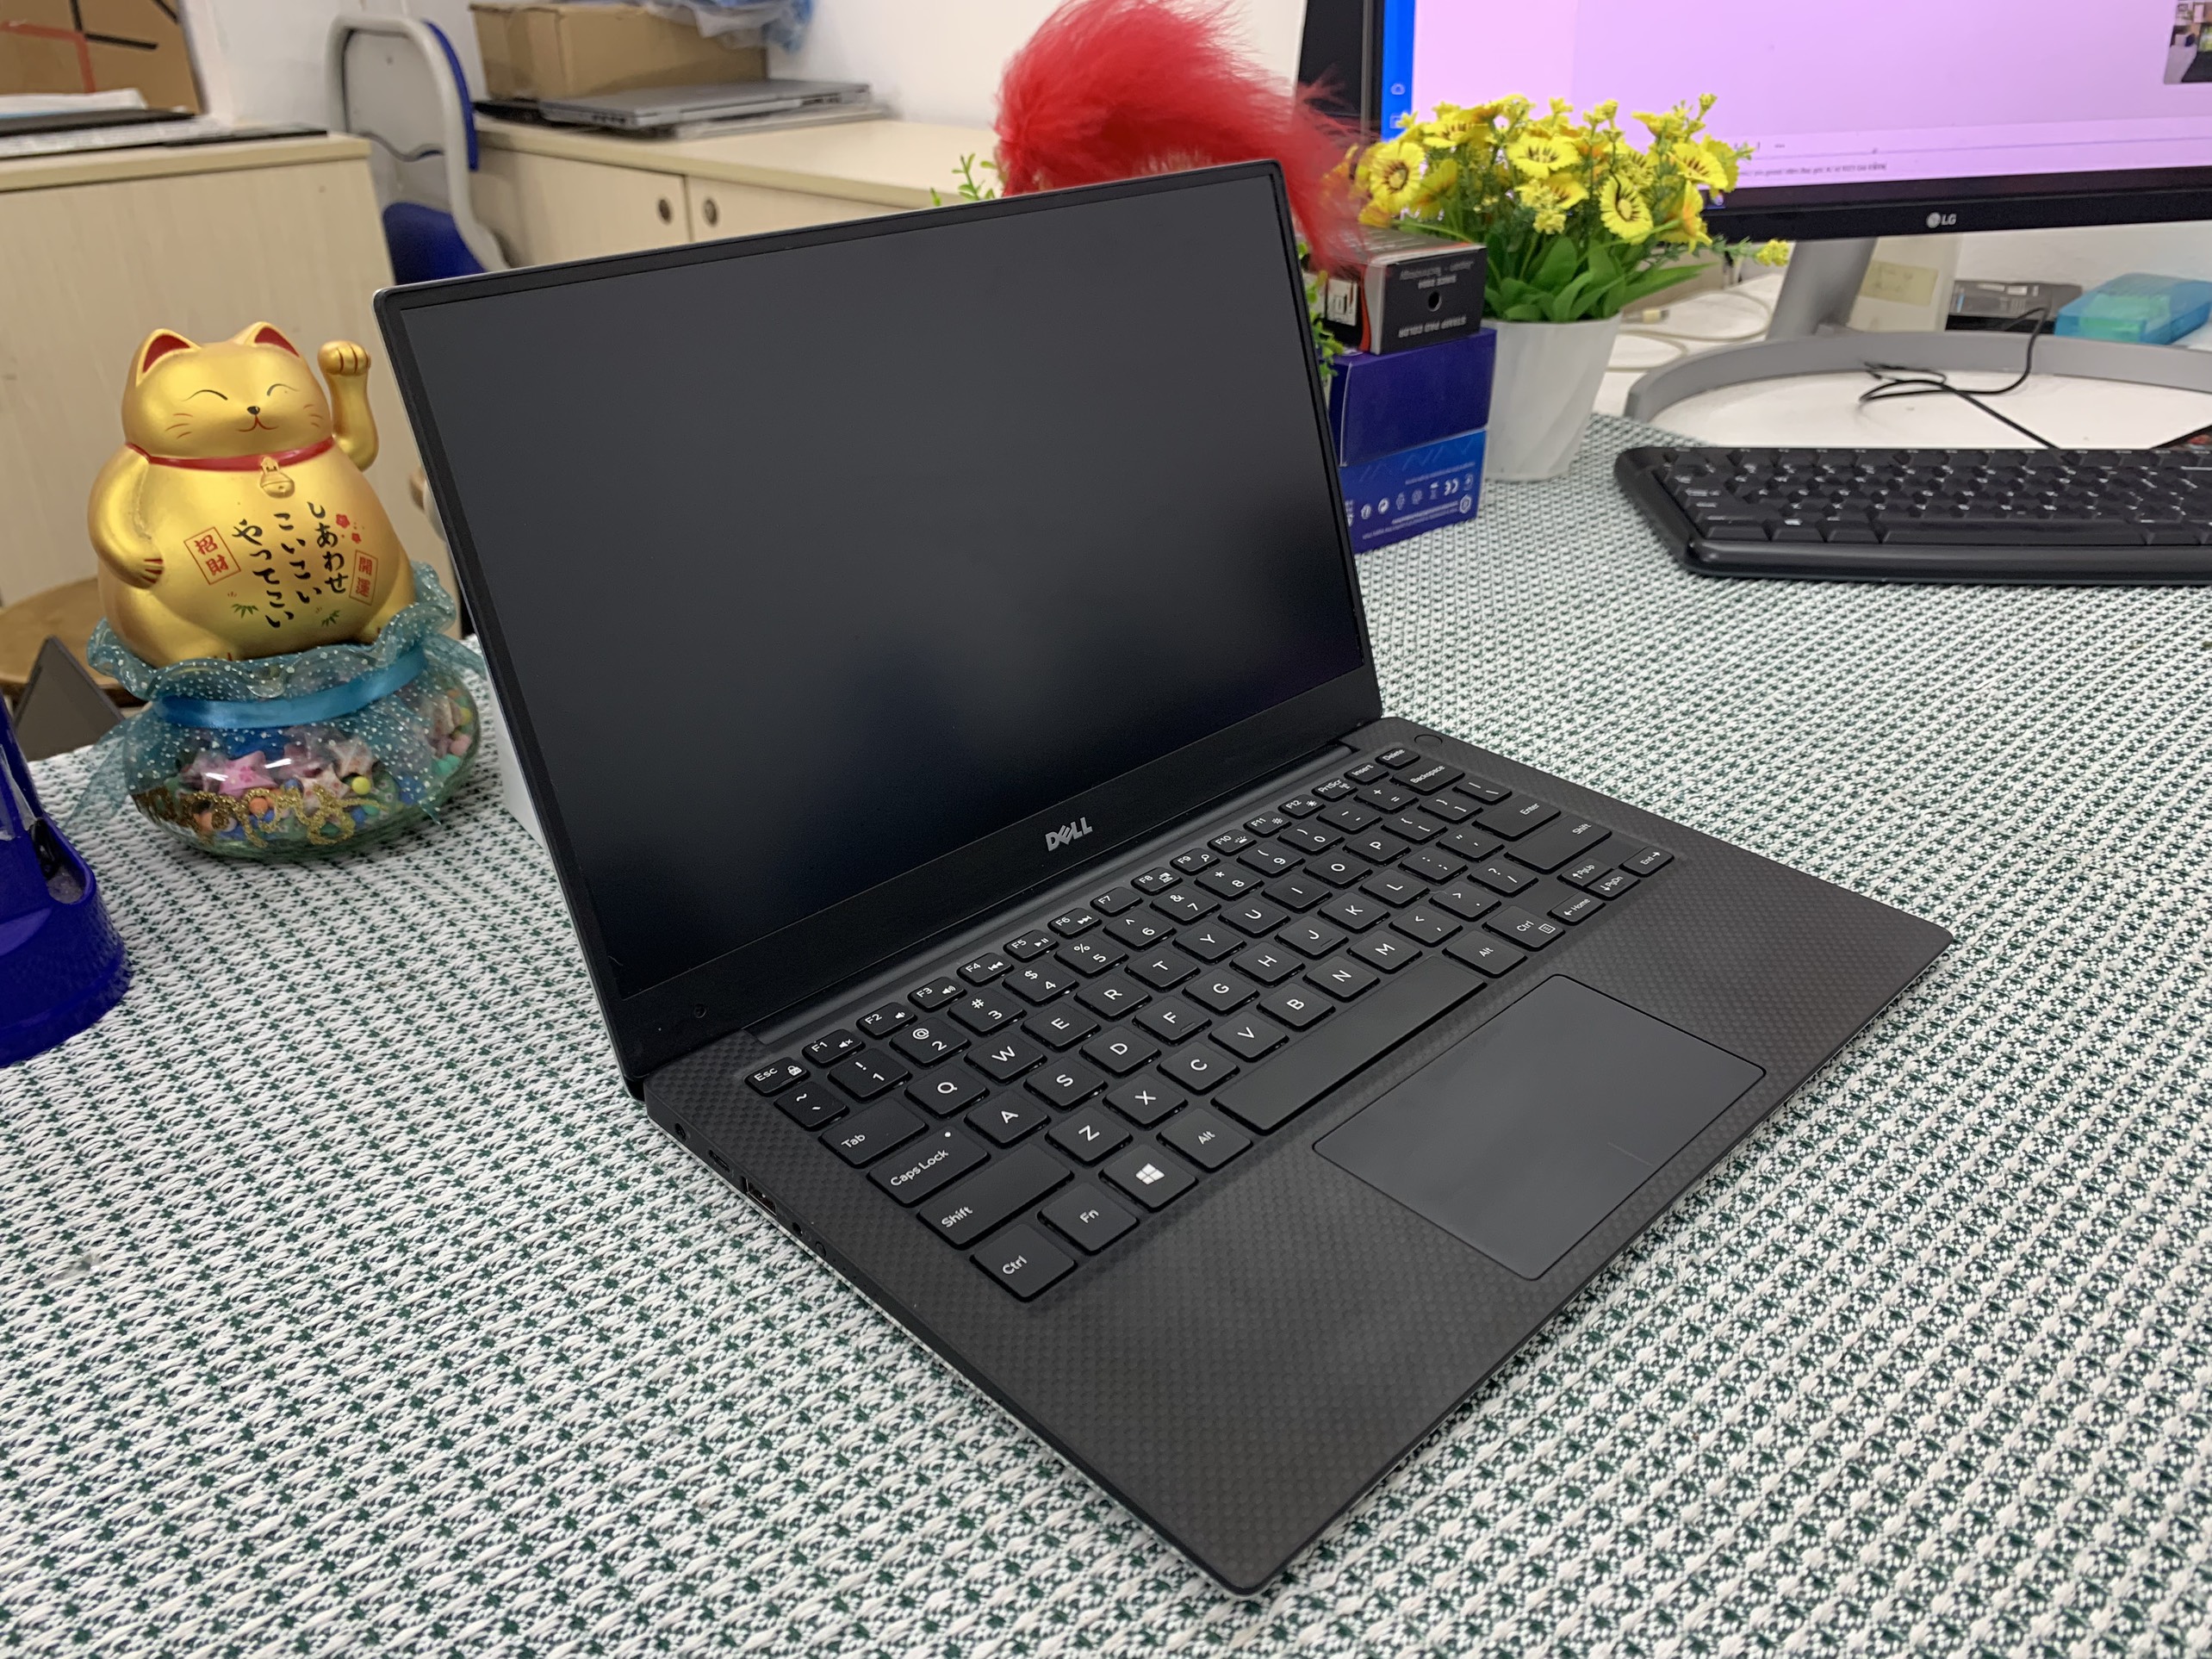 Dell XPS 13 9360